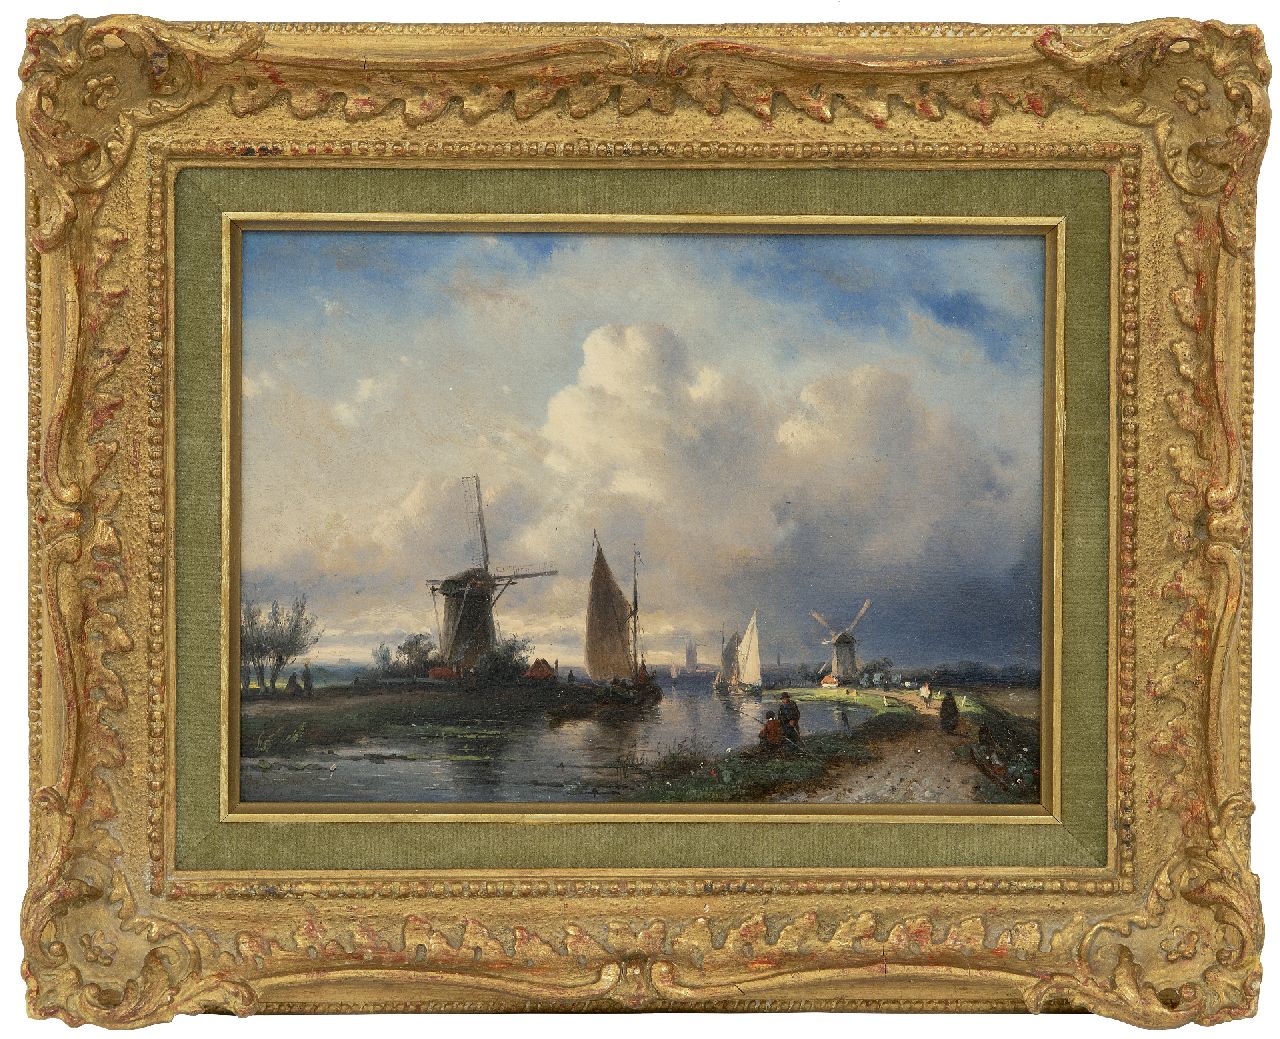 Leickert C.H.J.  | 'Charles' Henri Joseph Leickert | Paintings offered for sale | A view along the riverbank, oil on panel 17.9 x 24.8 cm, signed l.l.